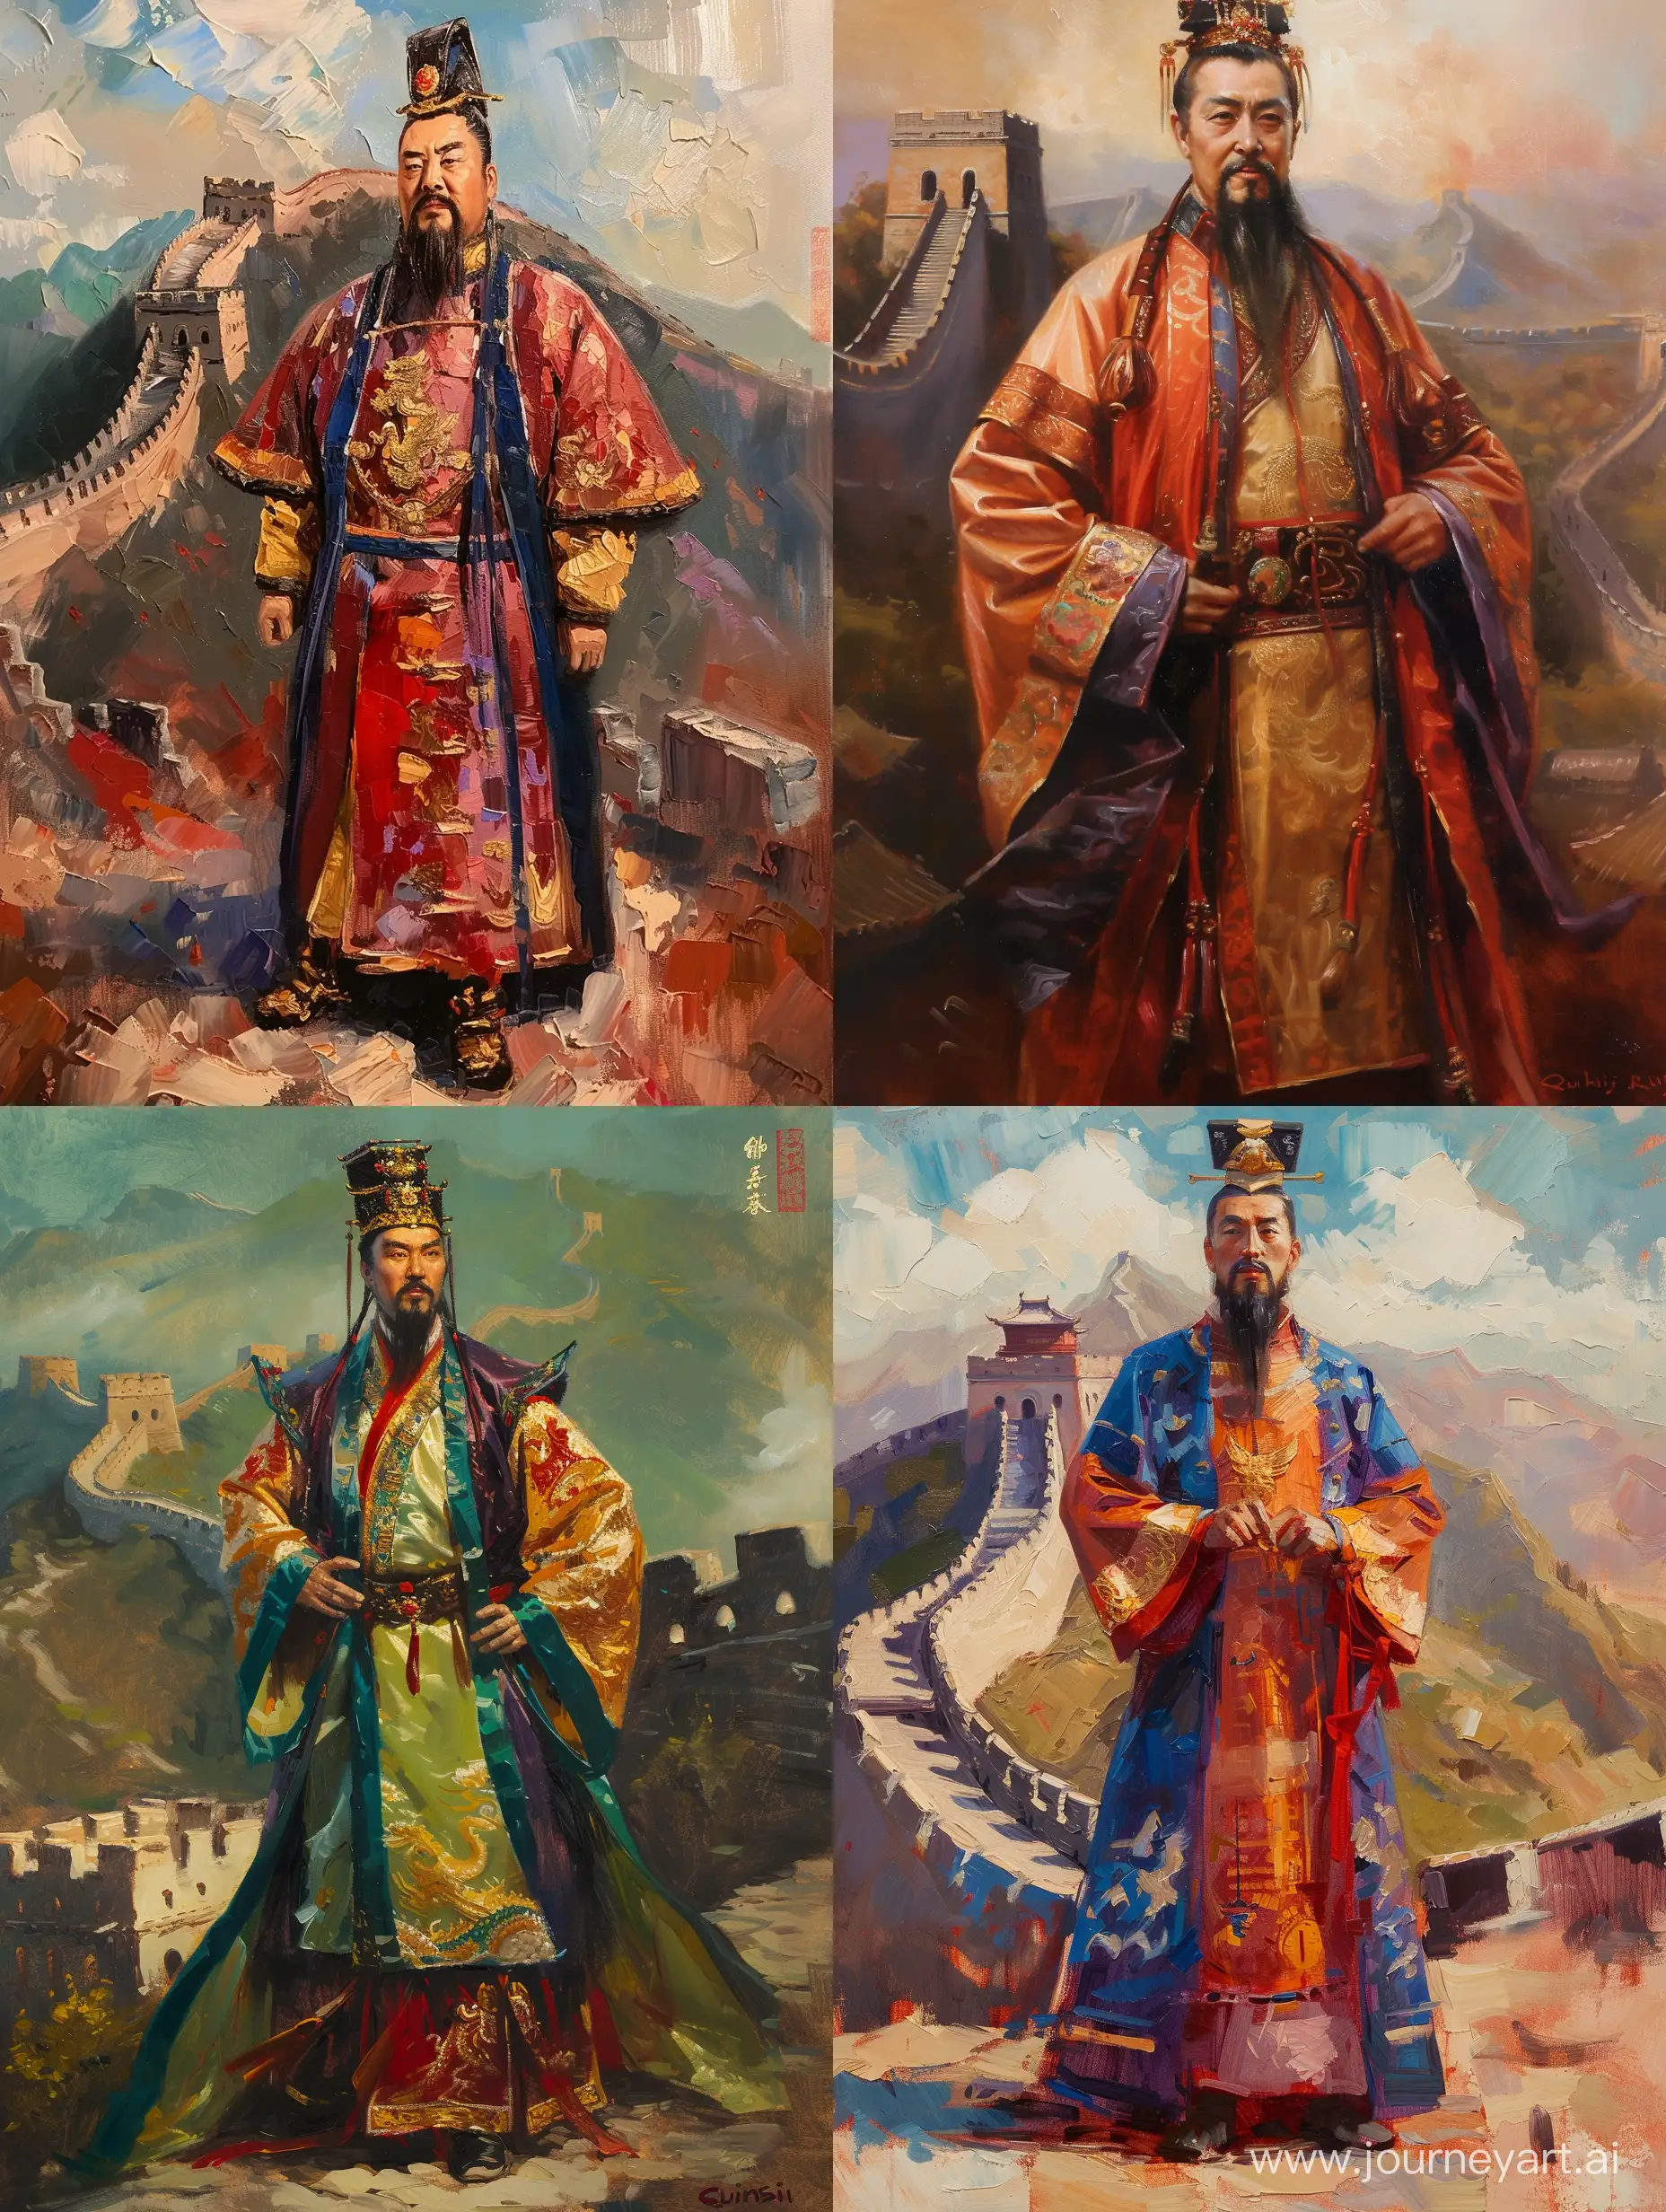 Chinese emperor Qin Shi Huang in traditional attire. Standing tall. The Great Wall of China themed background. Chinese essential. Oil painting. Brush strikes.